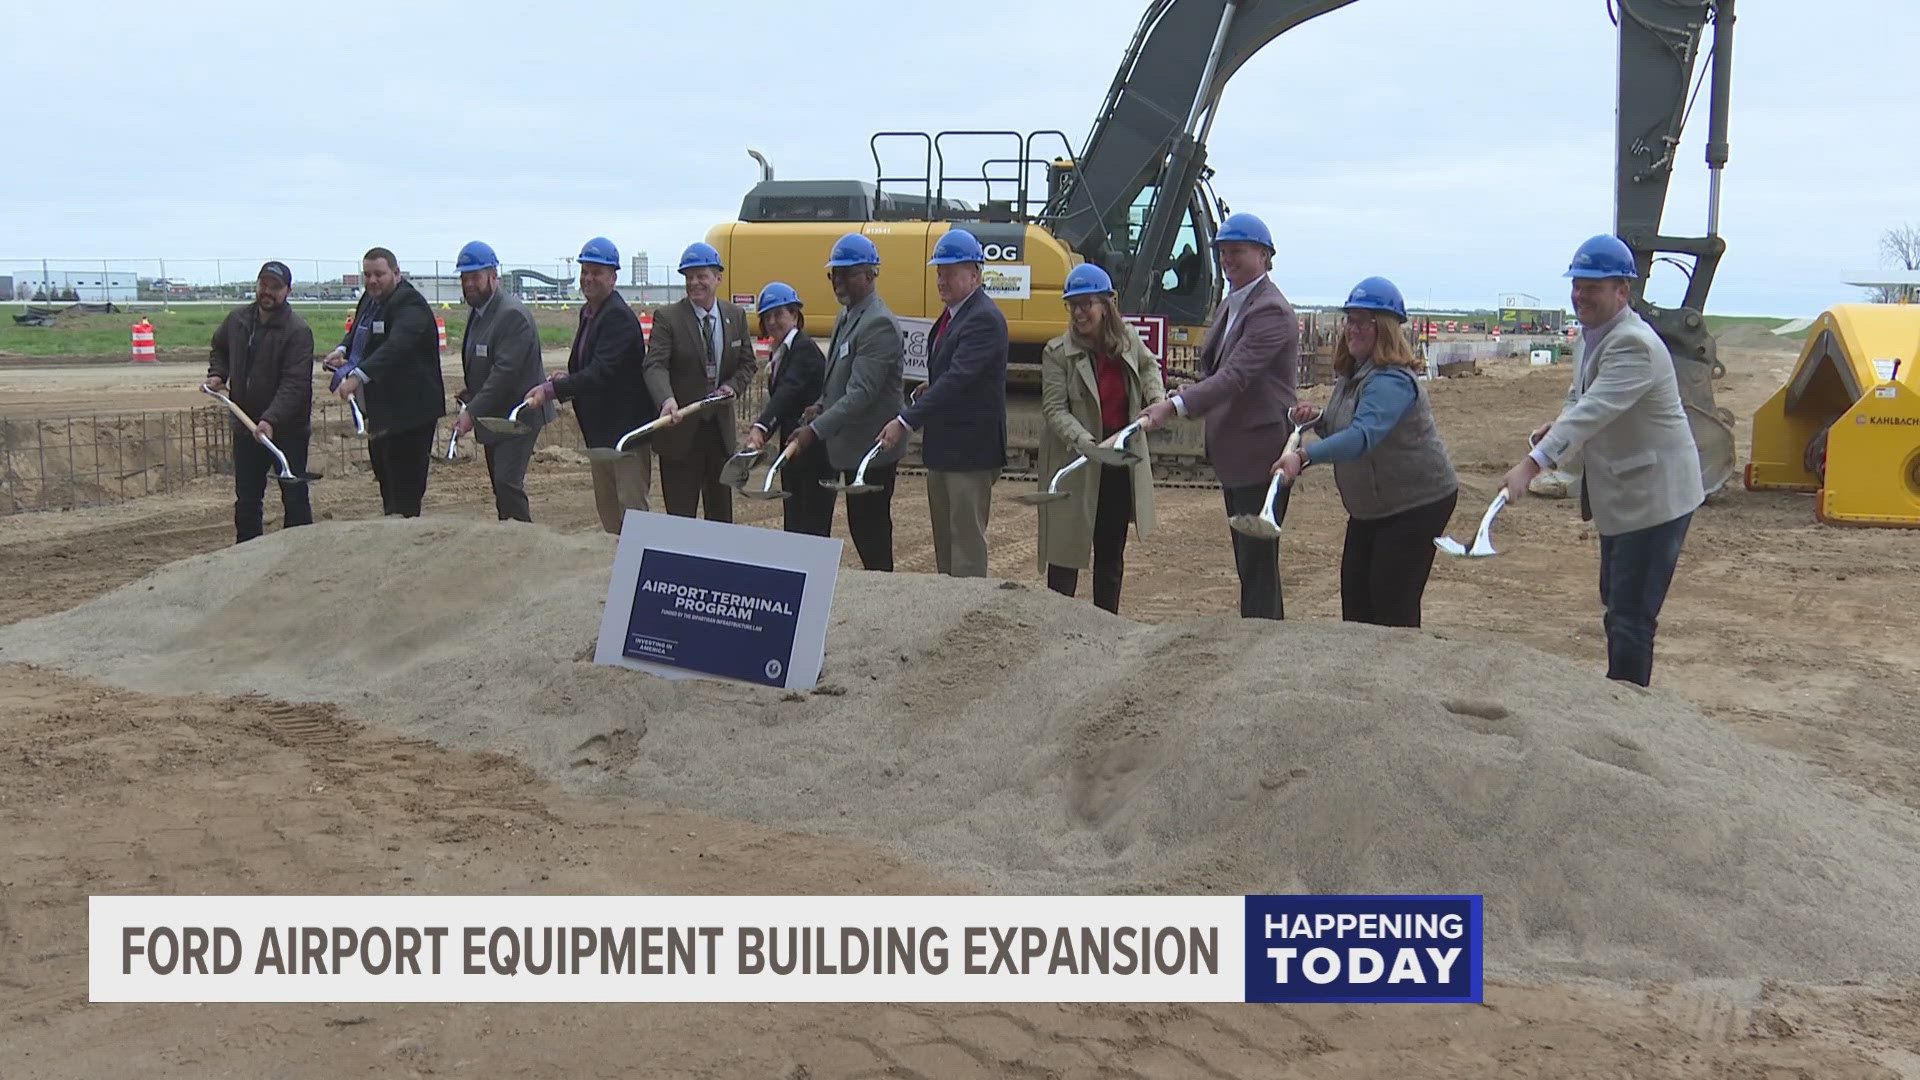 The project will expand the current building by 60,000 square feet, allowing the airport to support critical operations and accommodate forecasted passenger growth.